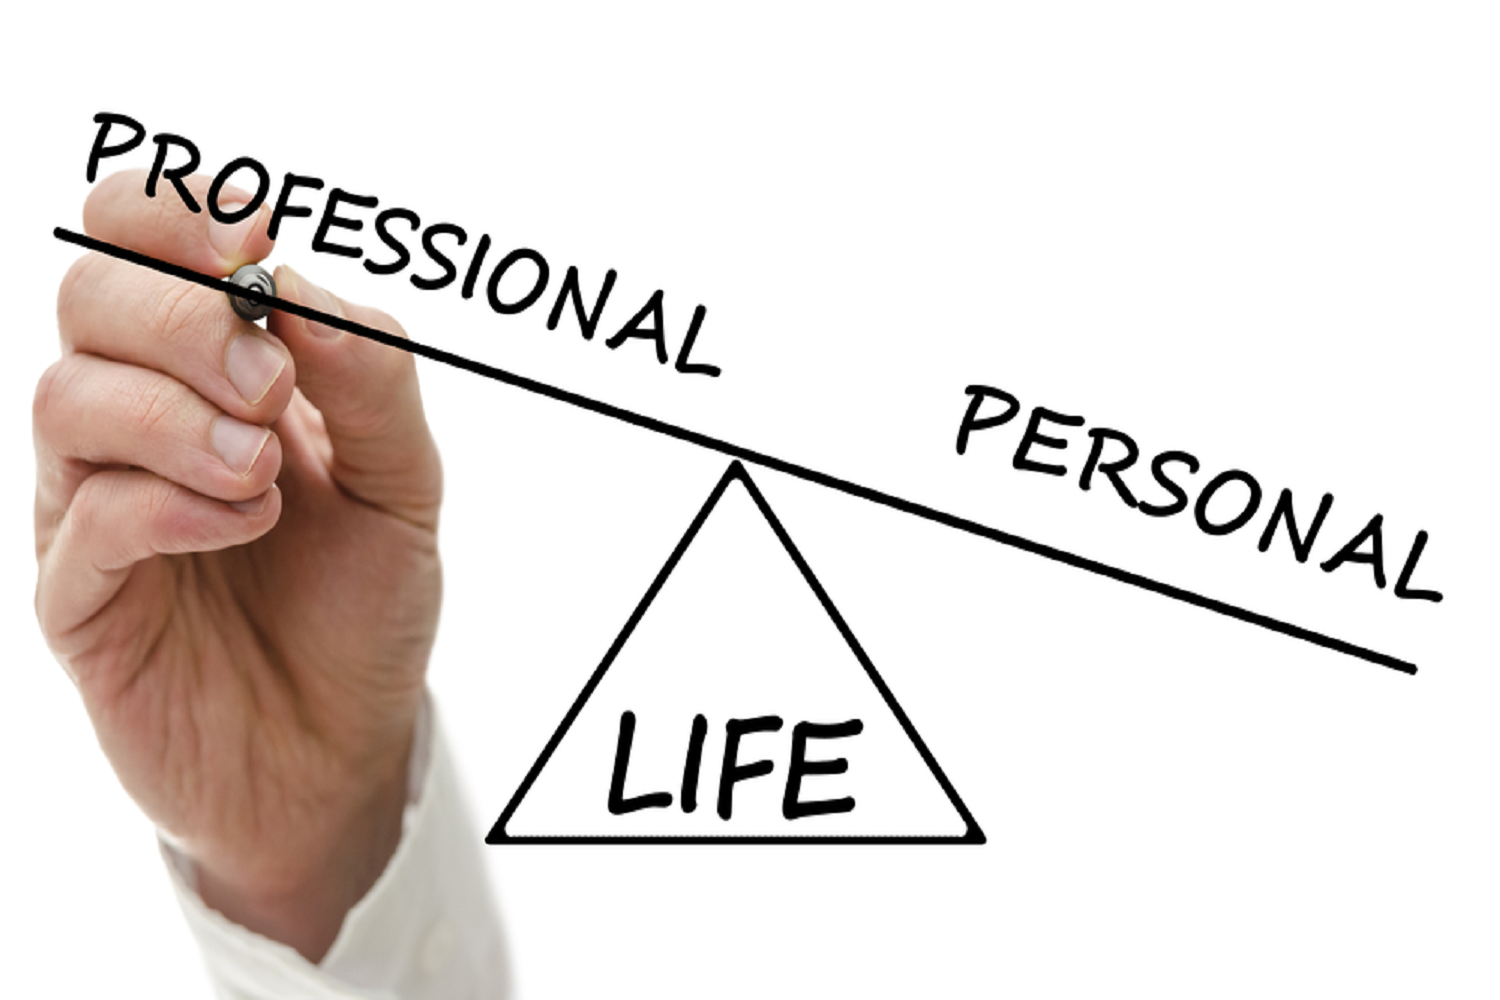 5 Incredible Tips To Triumph In Personal and Professional Life